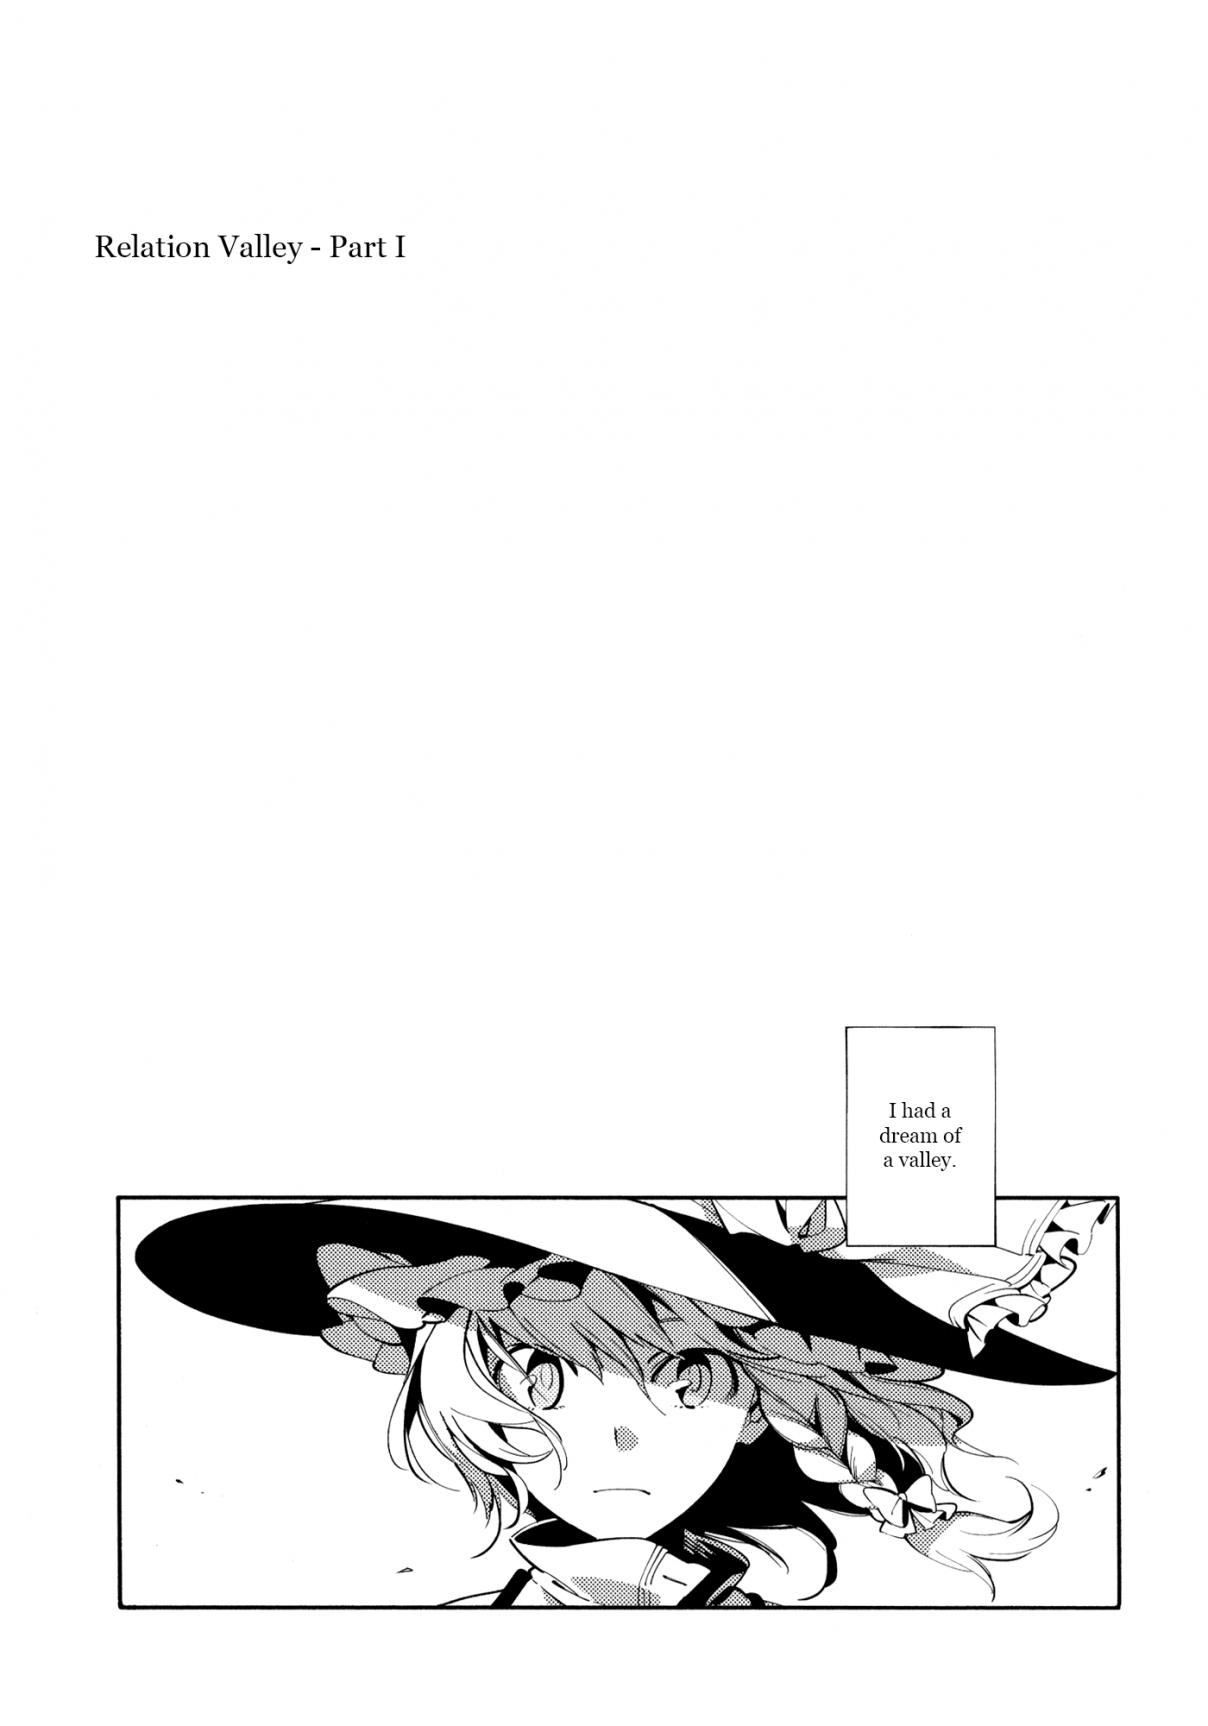 Touhou Project Relation Valley Anthology Vol. 1 (doujinshi) Vol. 1 Ch. 1 Relation Valley Part 1